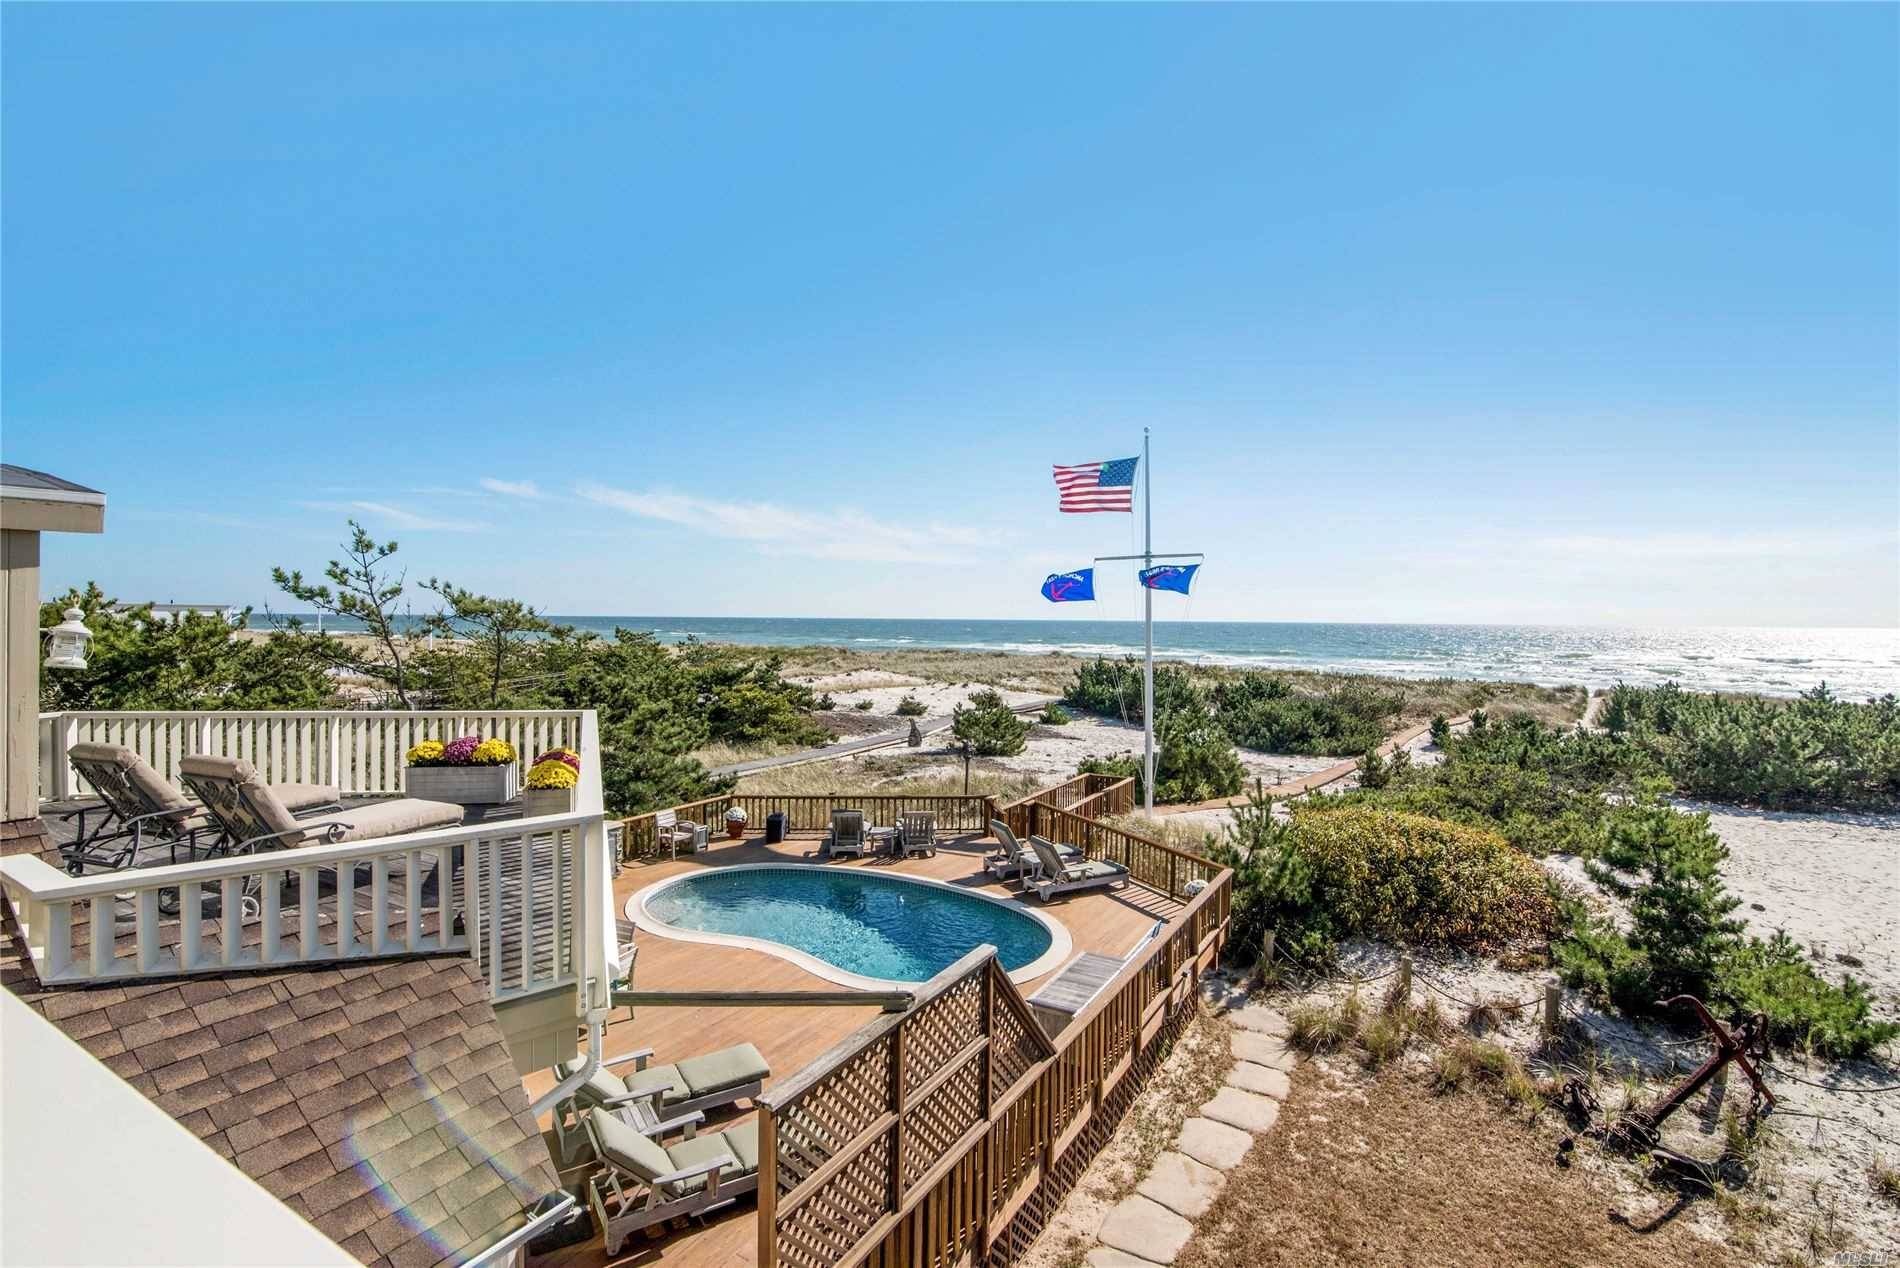 Majestically situated on protected Village Oceanfront, this meticulously maintained, newly renovated home by top Hamptons builder is located just a short distance from all Westhampton Beach Village amenities.